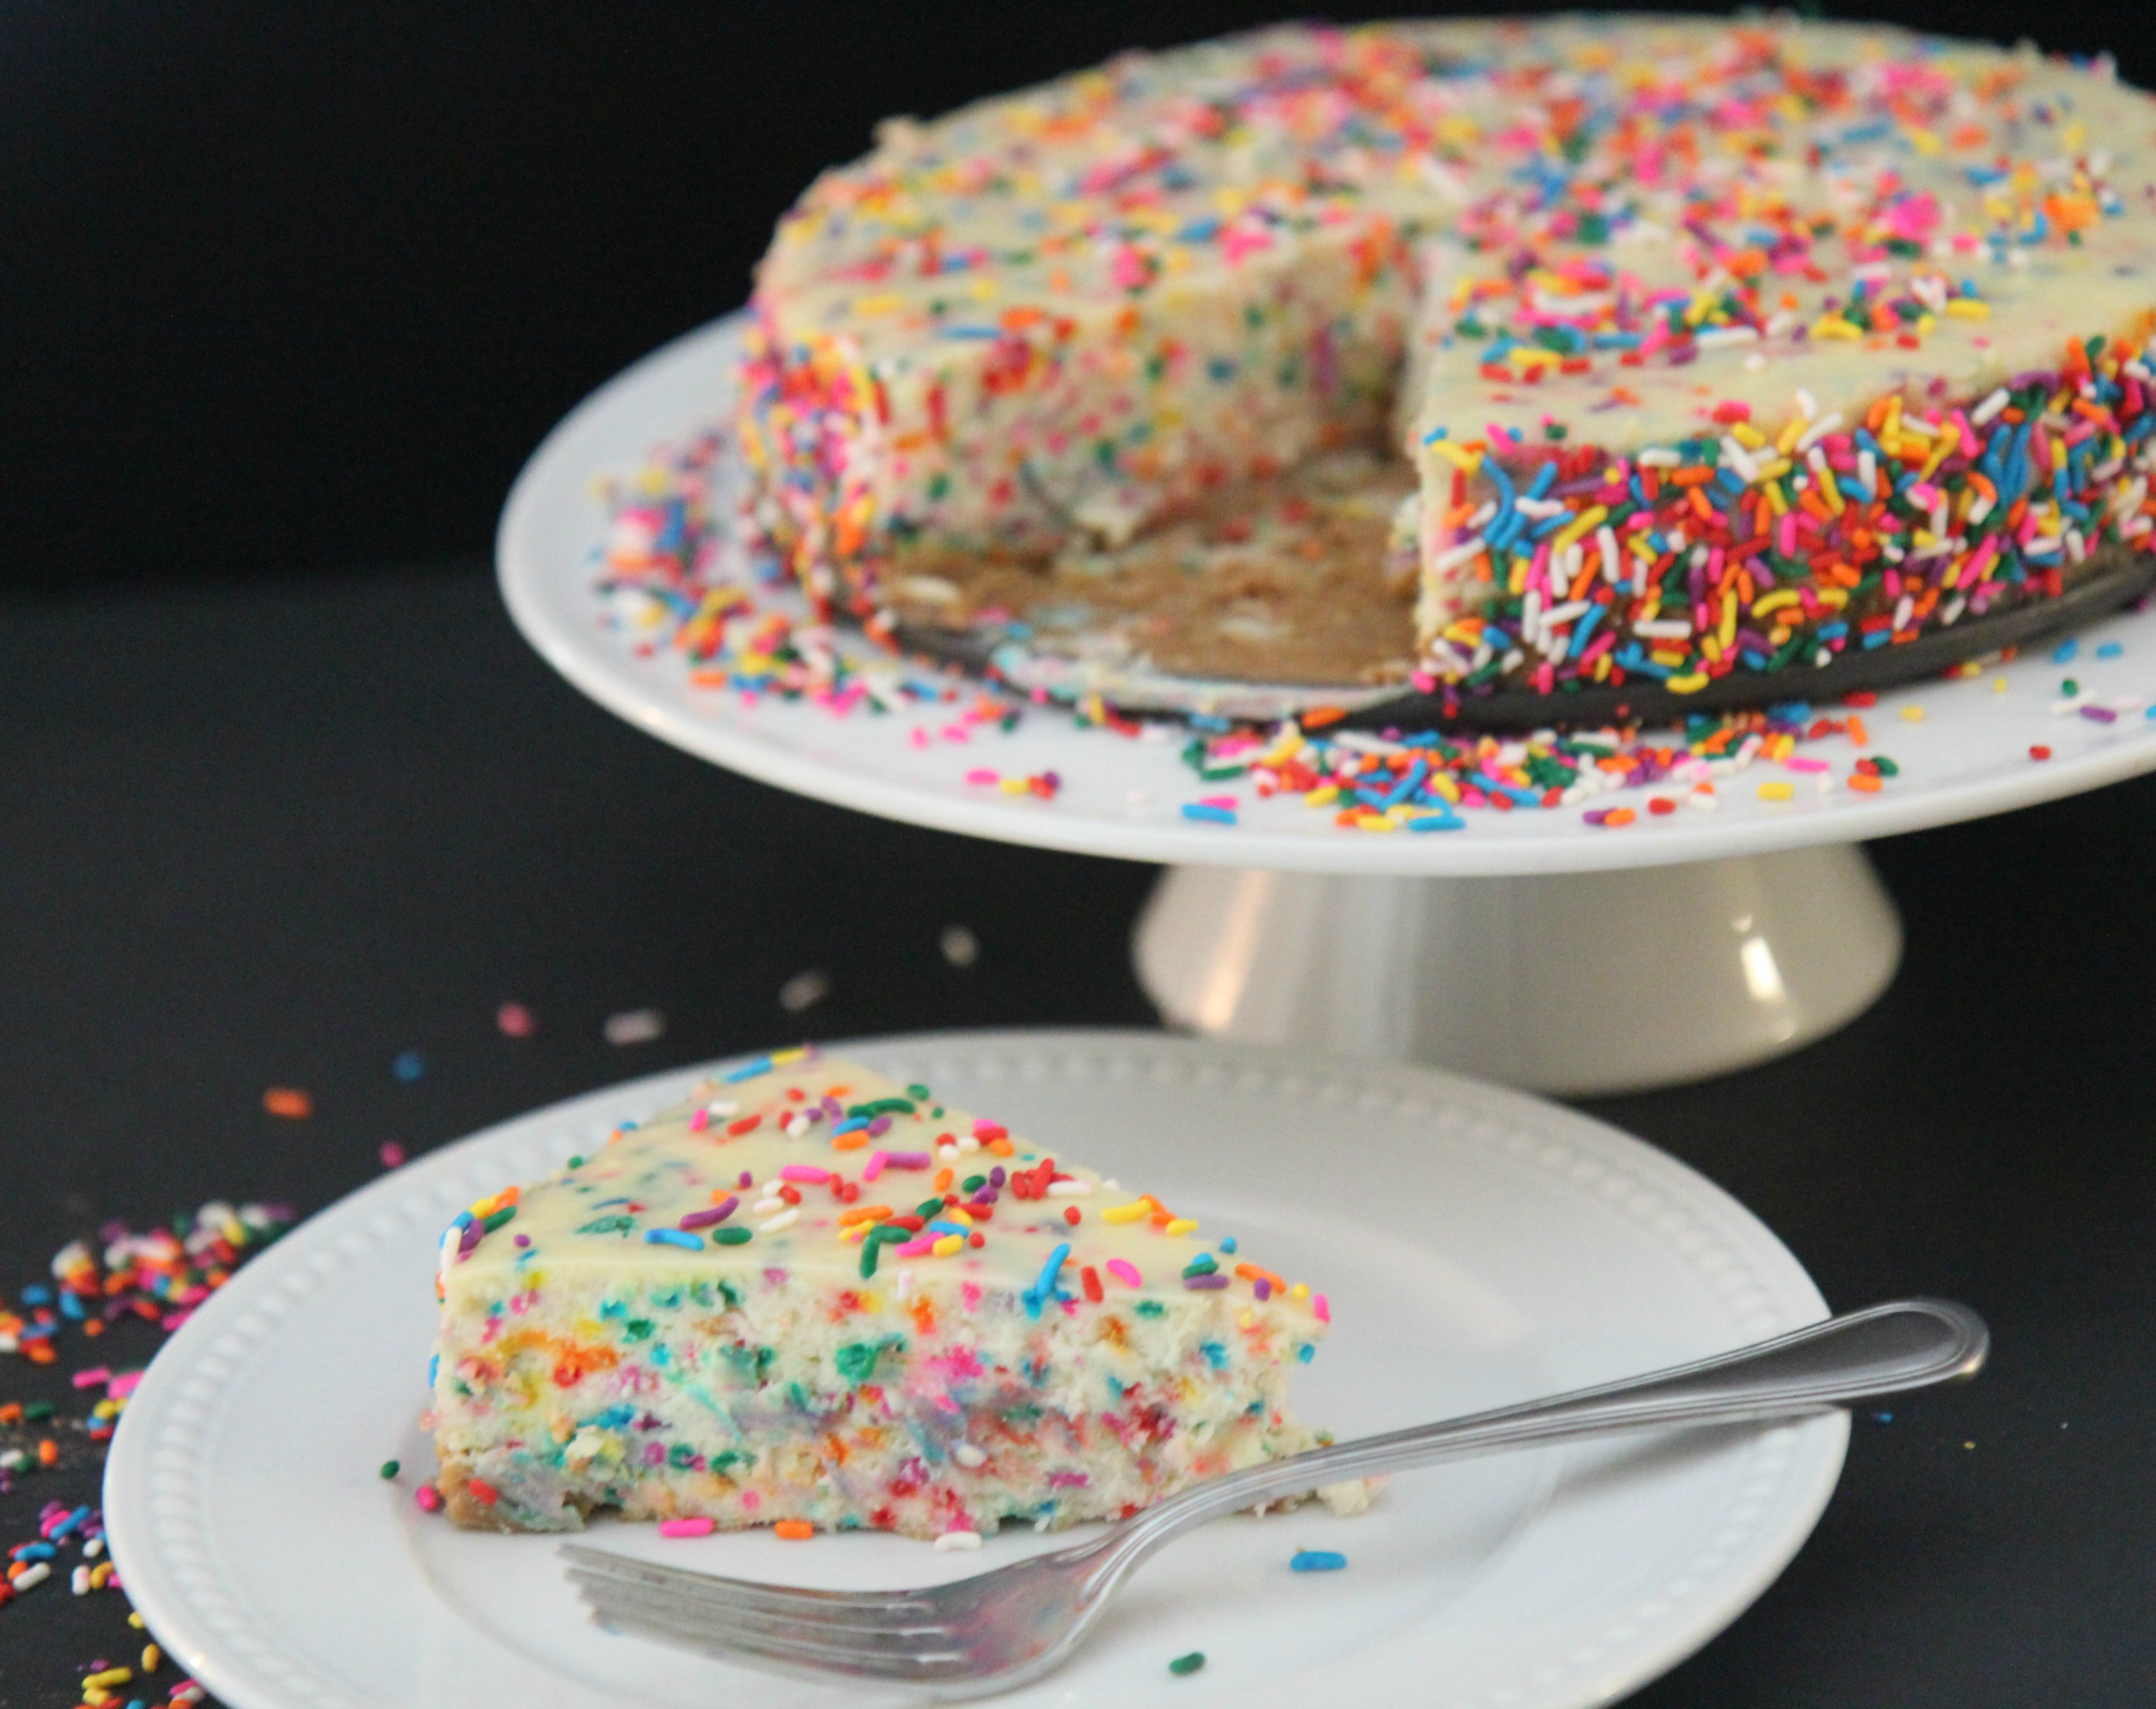 Learn how to make this funfetti cheesecake at cookedbyjulie.com